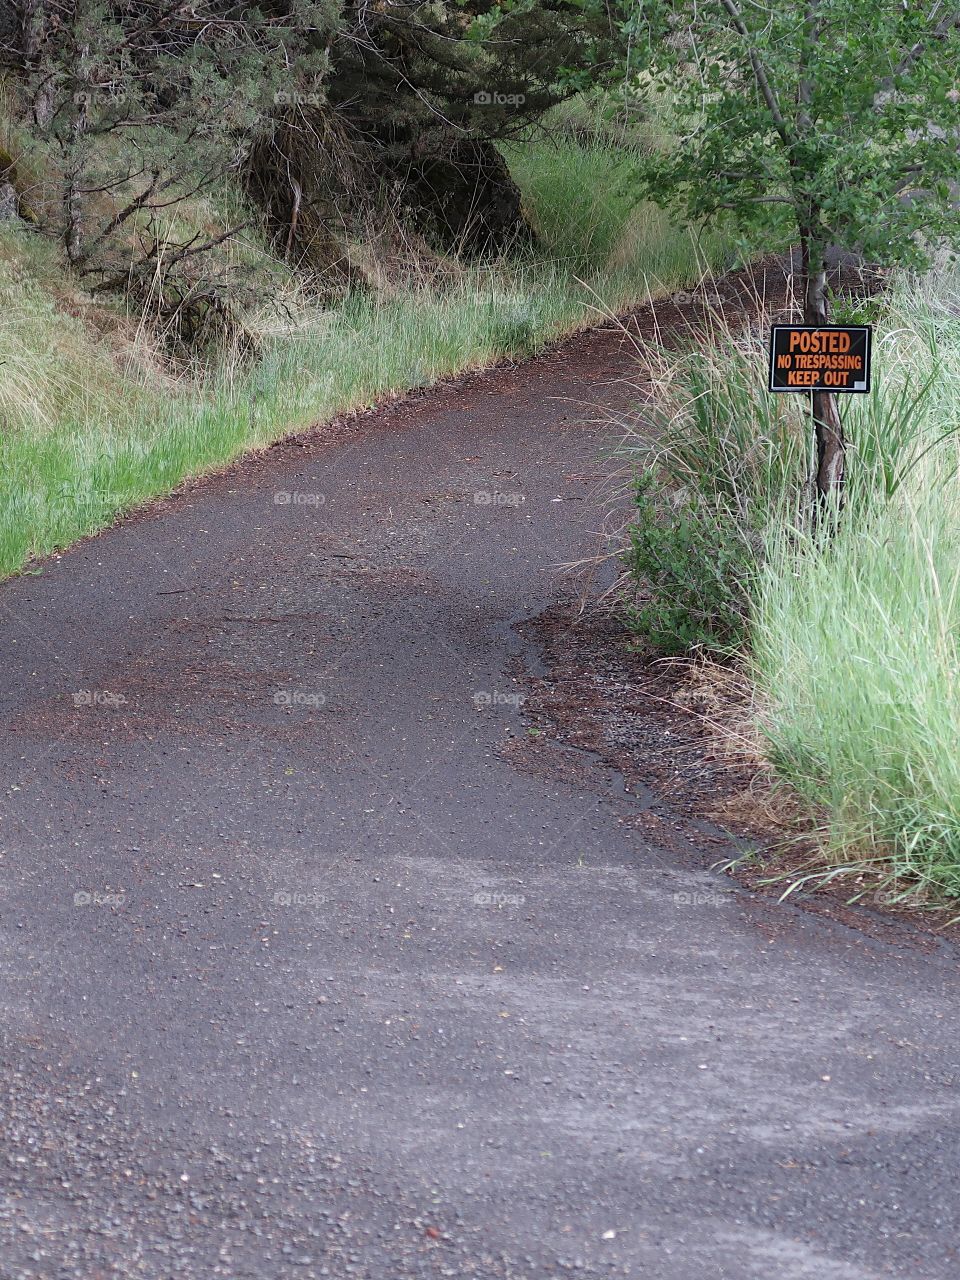 A private road leads up a hill in Central Oregon with a posted sign. 